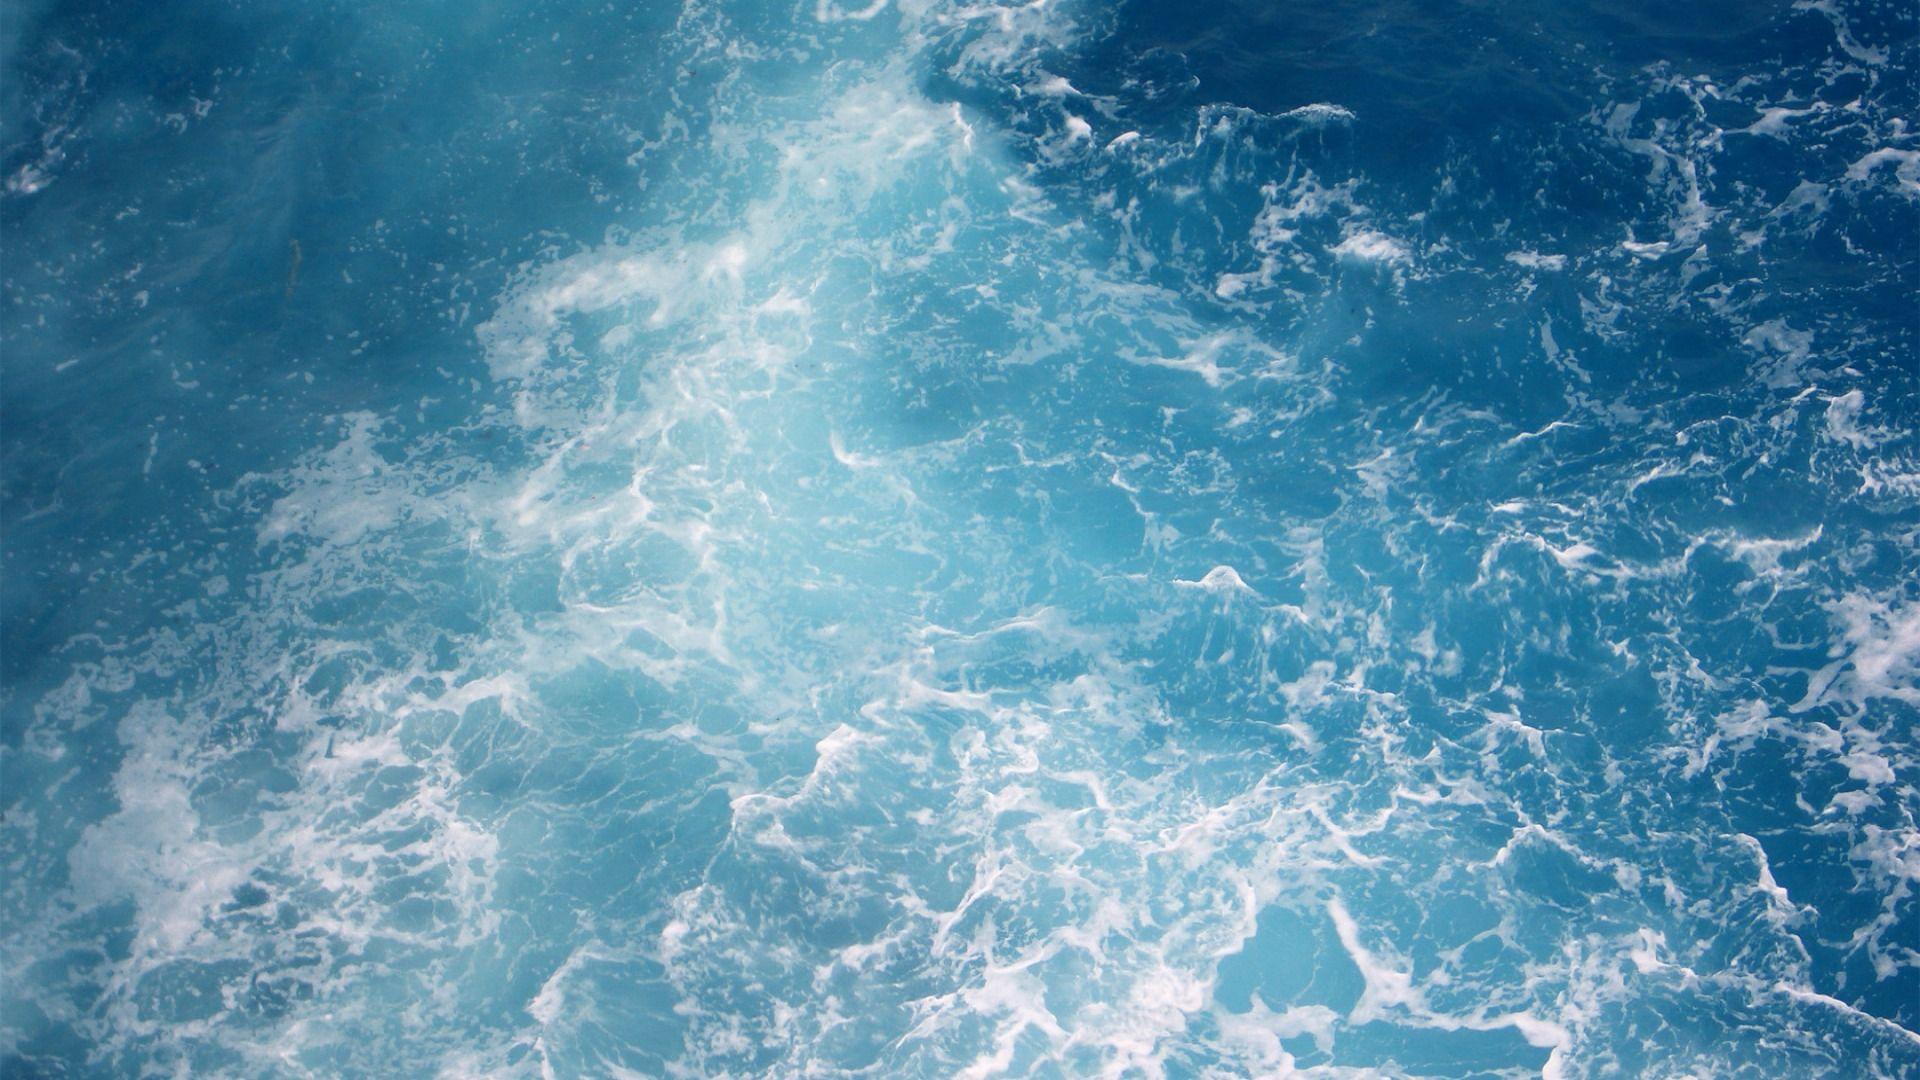 tumblr water backgrounds